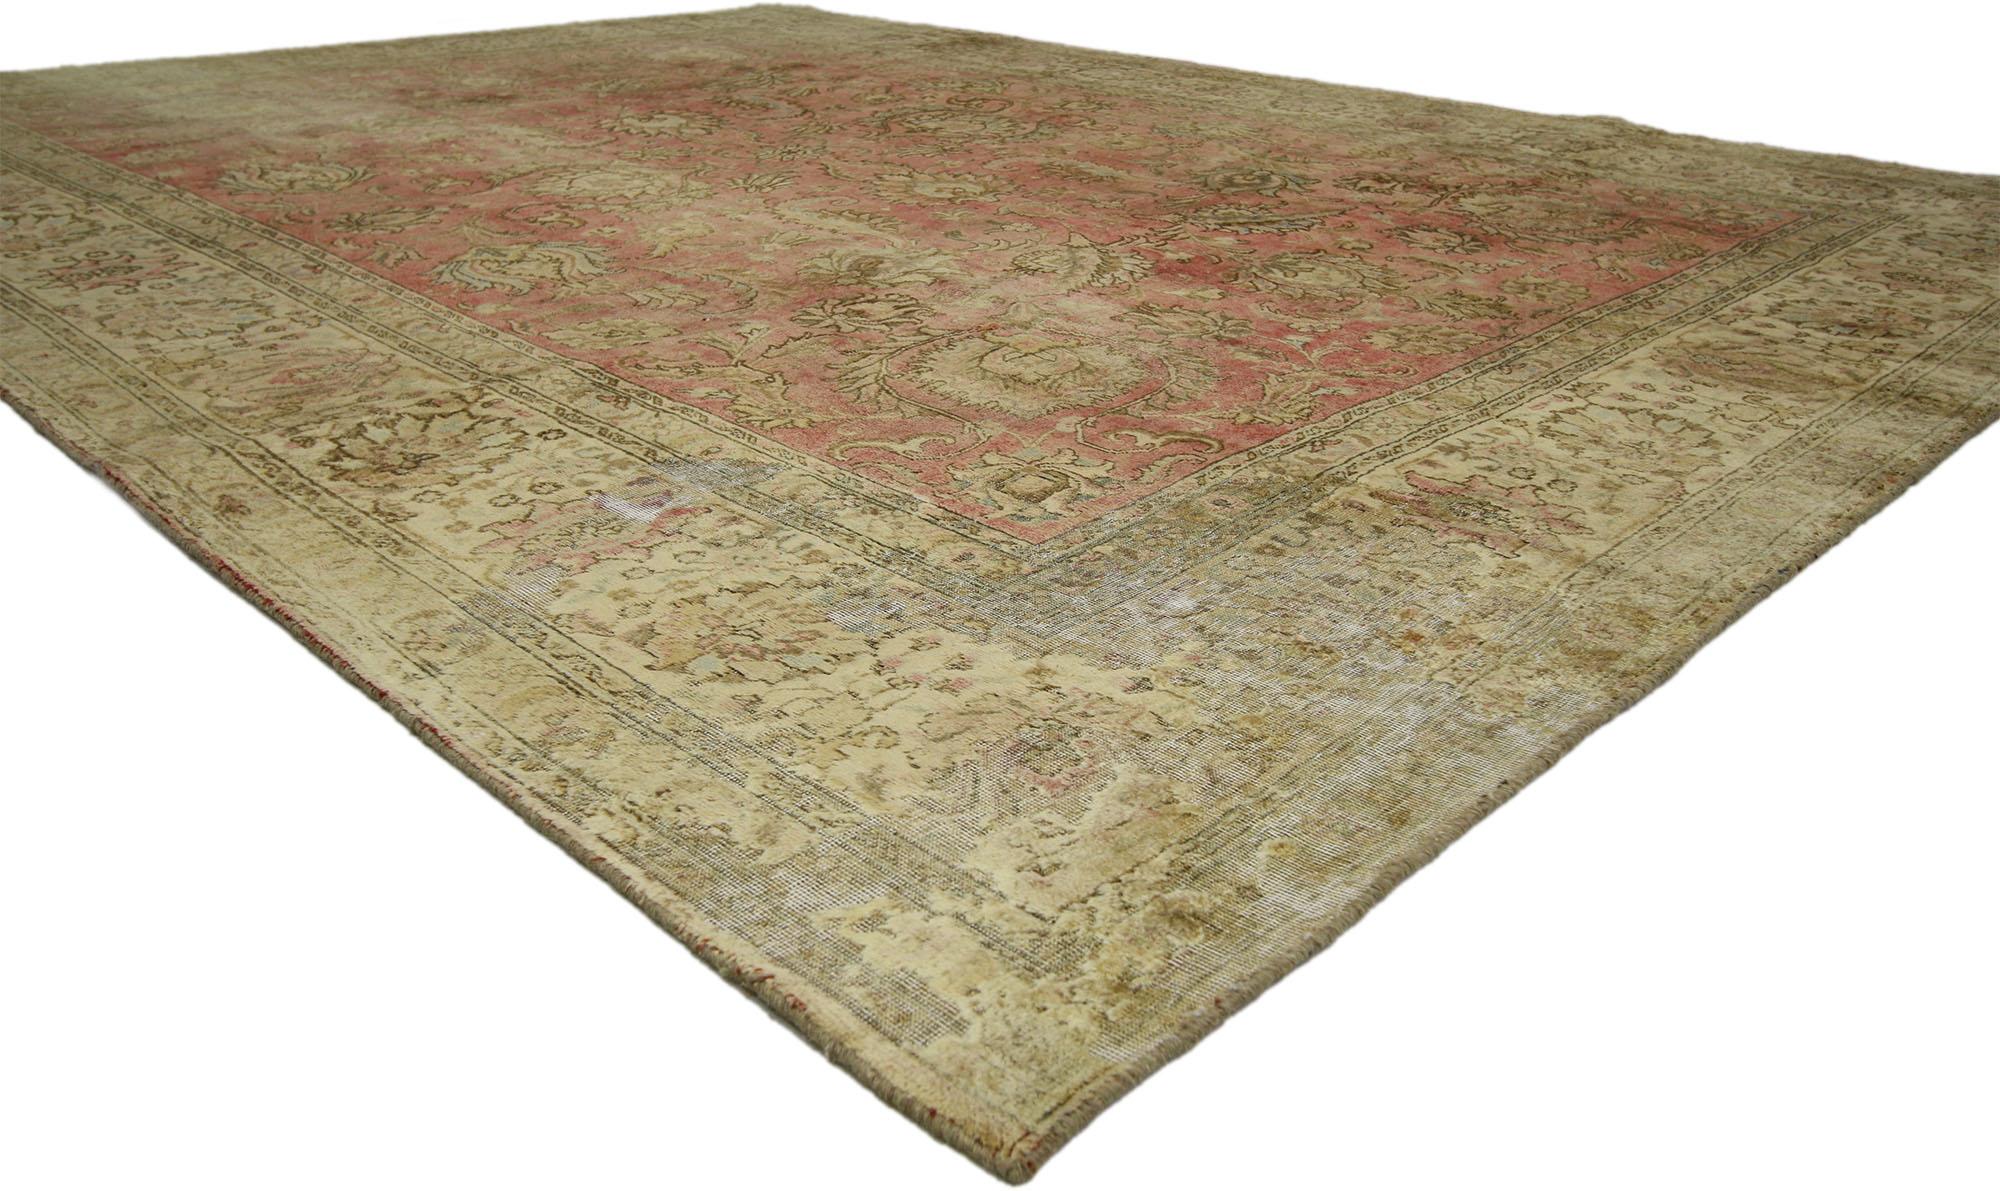 60779, distressed antique Persian Tabriz rug Industrial Rustic style. Melding sumptuous elegance and weathered beauty, this distressed antique Persian Tabriz rug is the epitome of a well-loved and classic style. This hand knotted wool antique